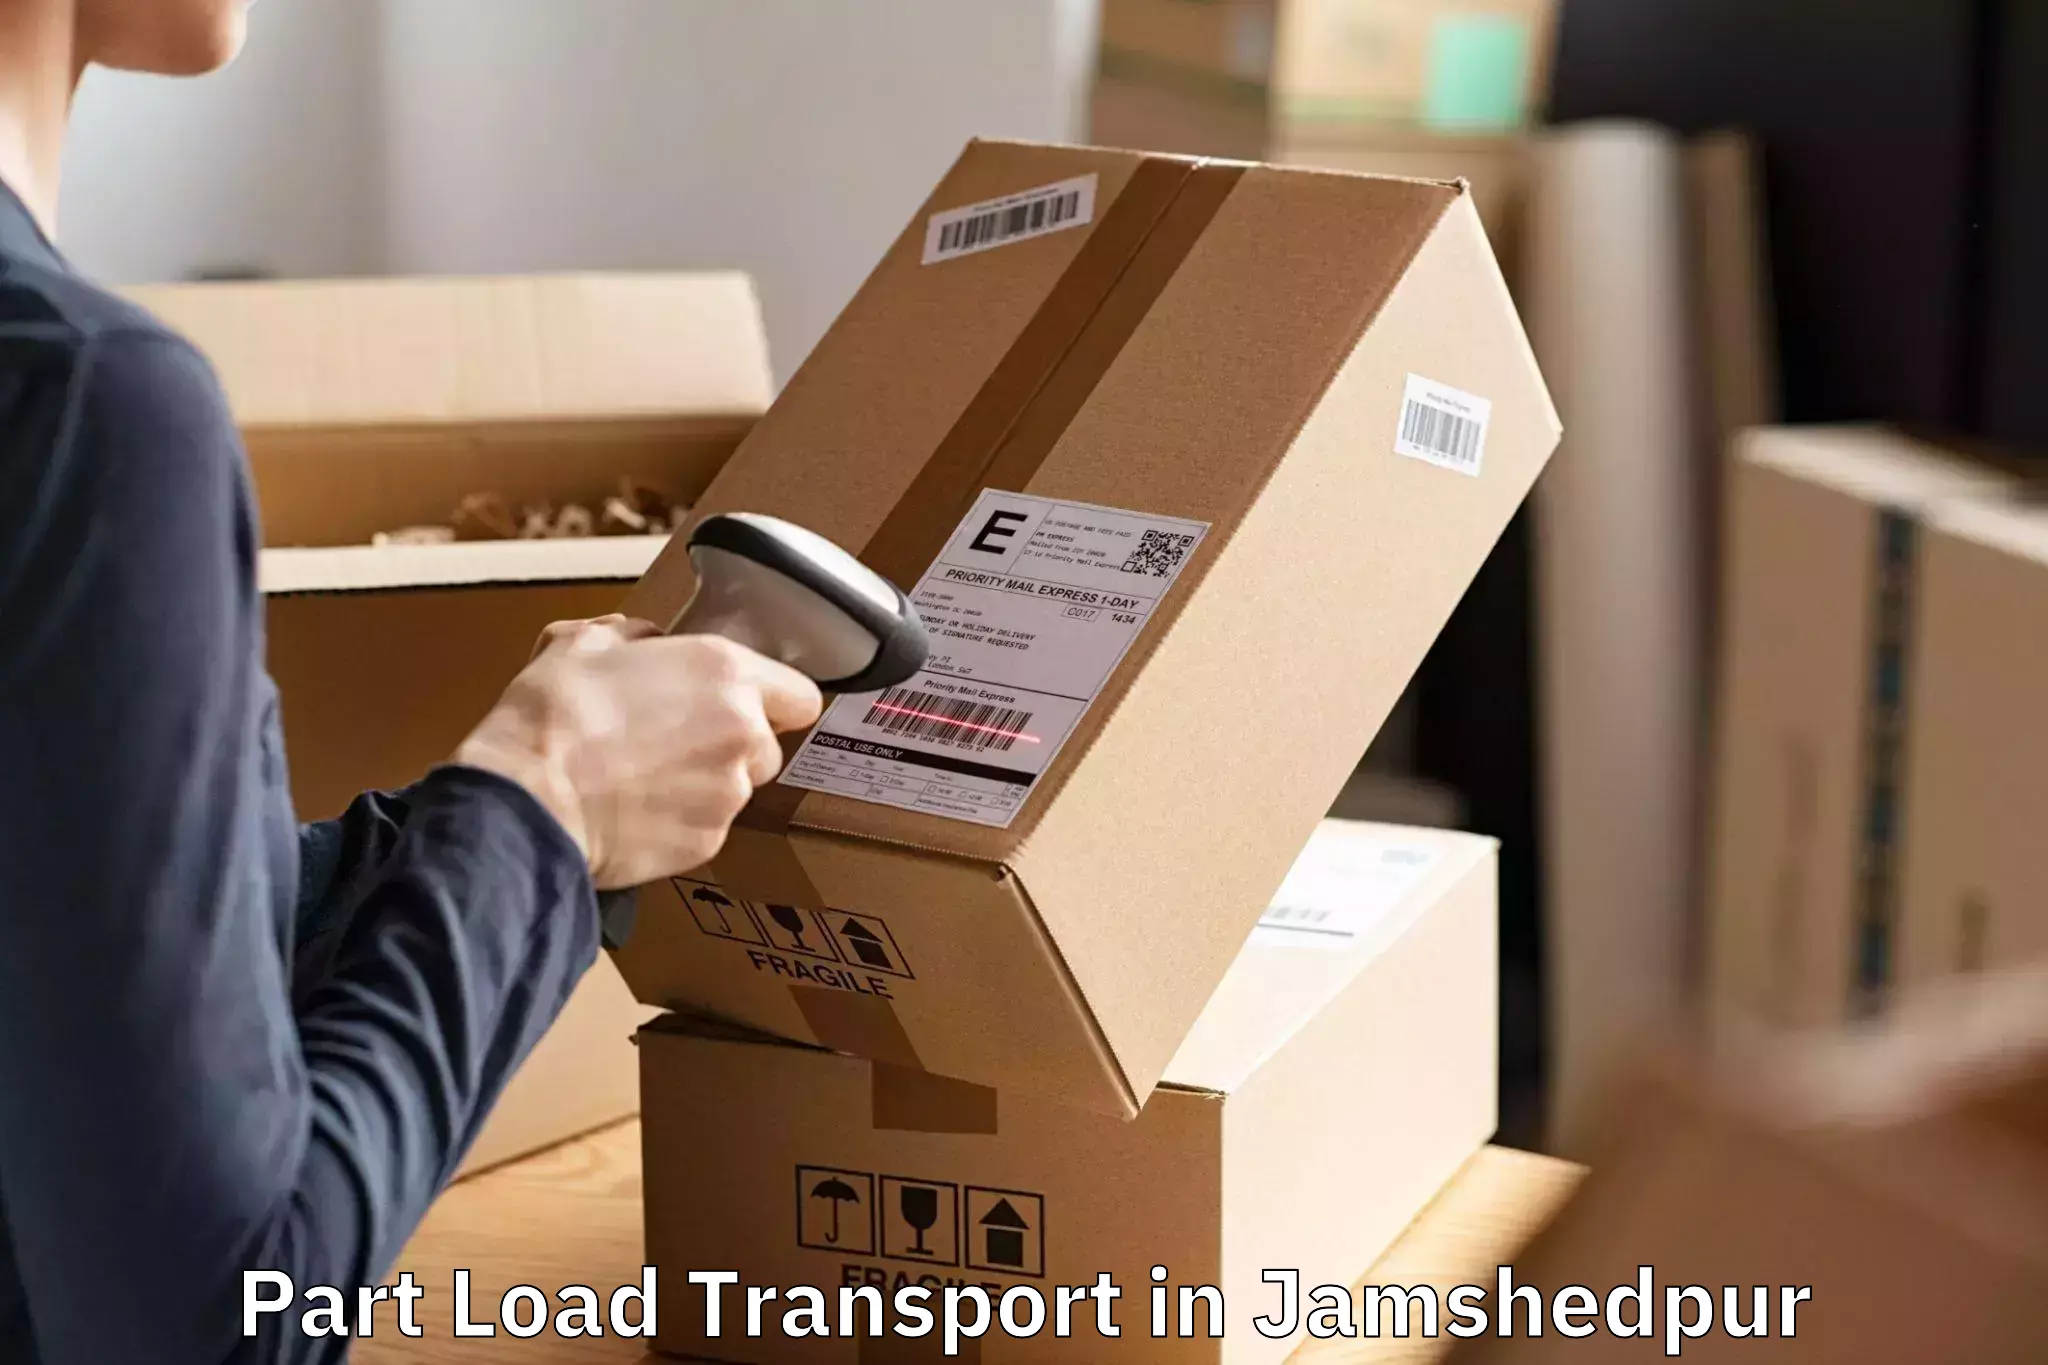 Trusted Part Load Transport in Jamshedpur, Jharkhand (JH)